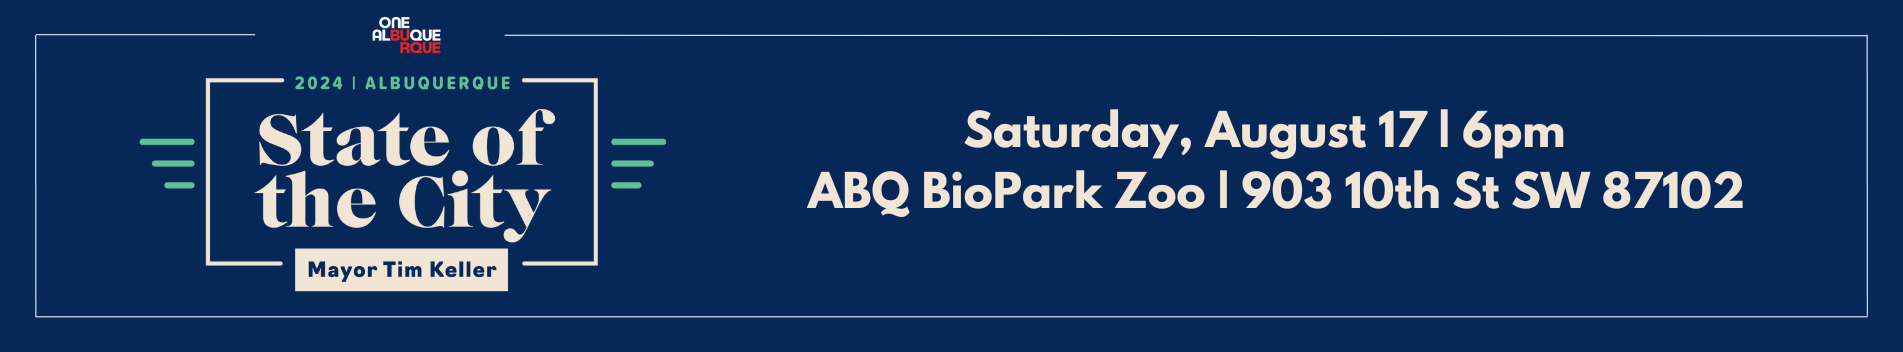 Red One Albuquerque logo above the text 2024 Albuquerque State of the City Mayor Tim Keller, Saturday, August 17, 6pm. ABQ BioPark Zoo, 903 10th St SW 97102